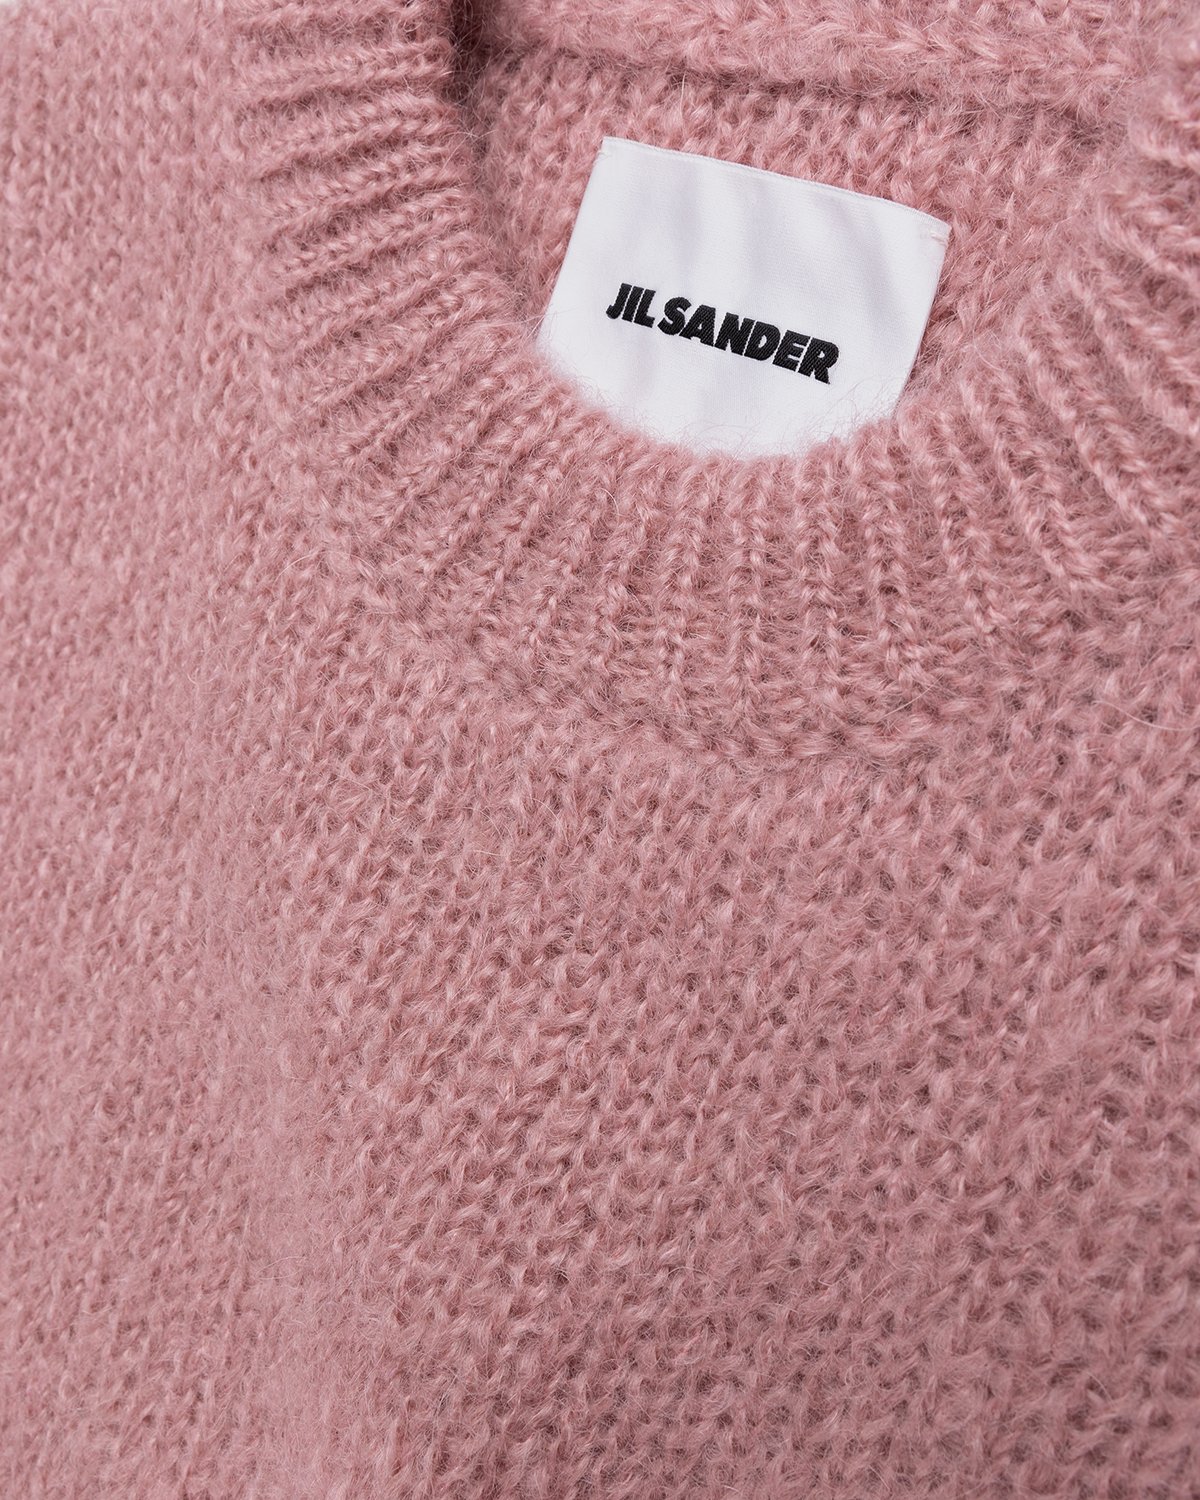 Jil Sander - Knitted Sweater Pink - Clothing - Pink - Image 3